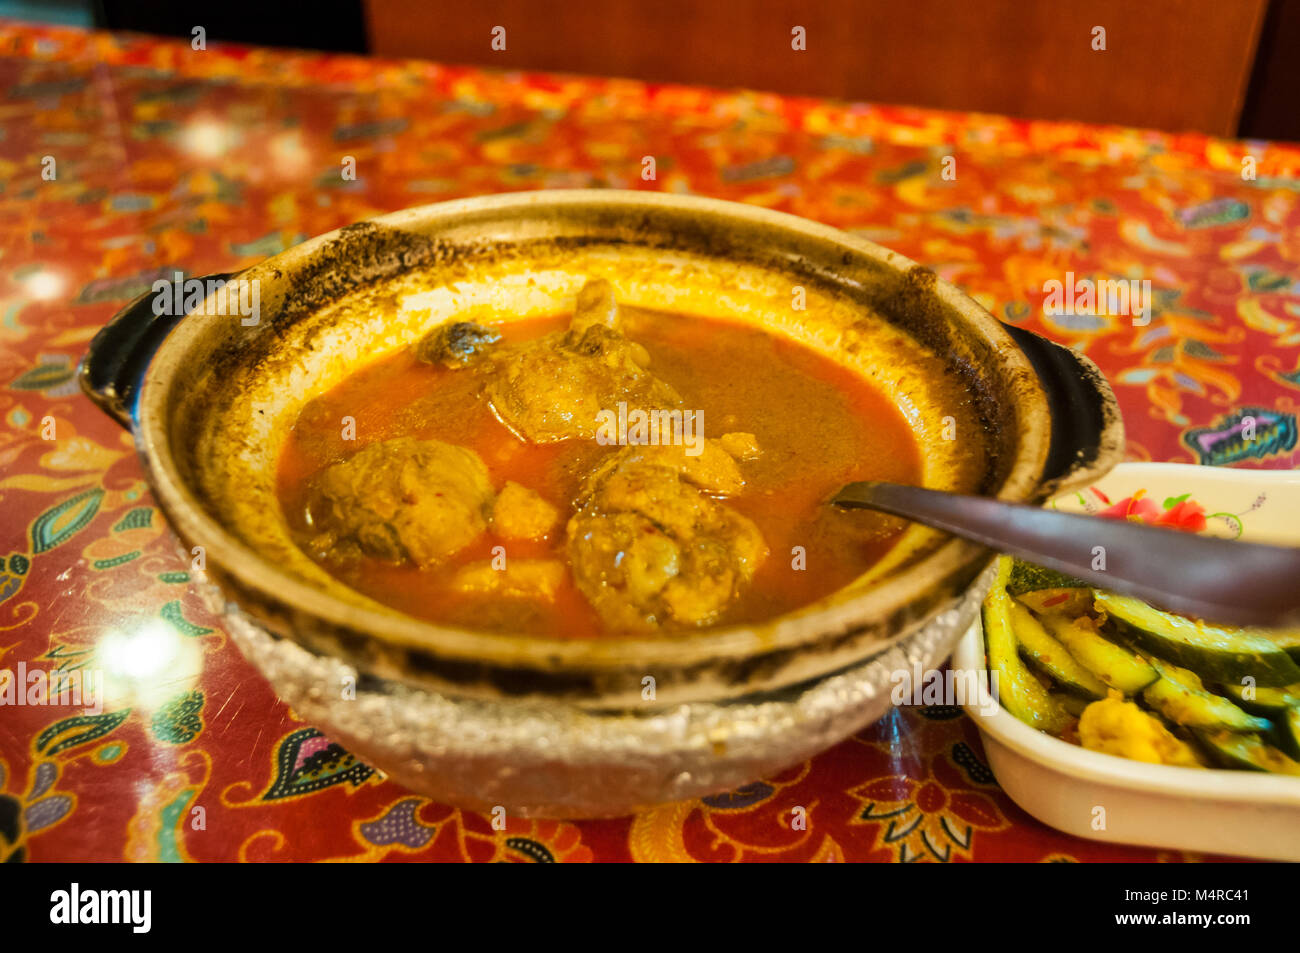 Nonya chicken curry as cooked by Chilli Padi on Joo Chiat Place, Singapore. Stock Photo